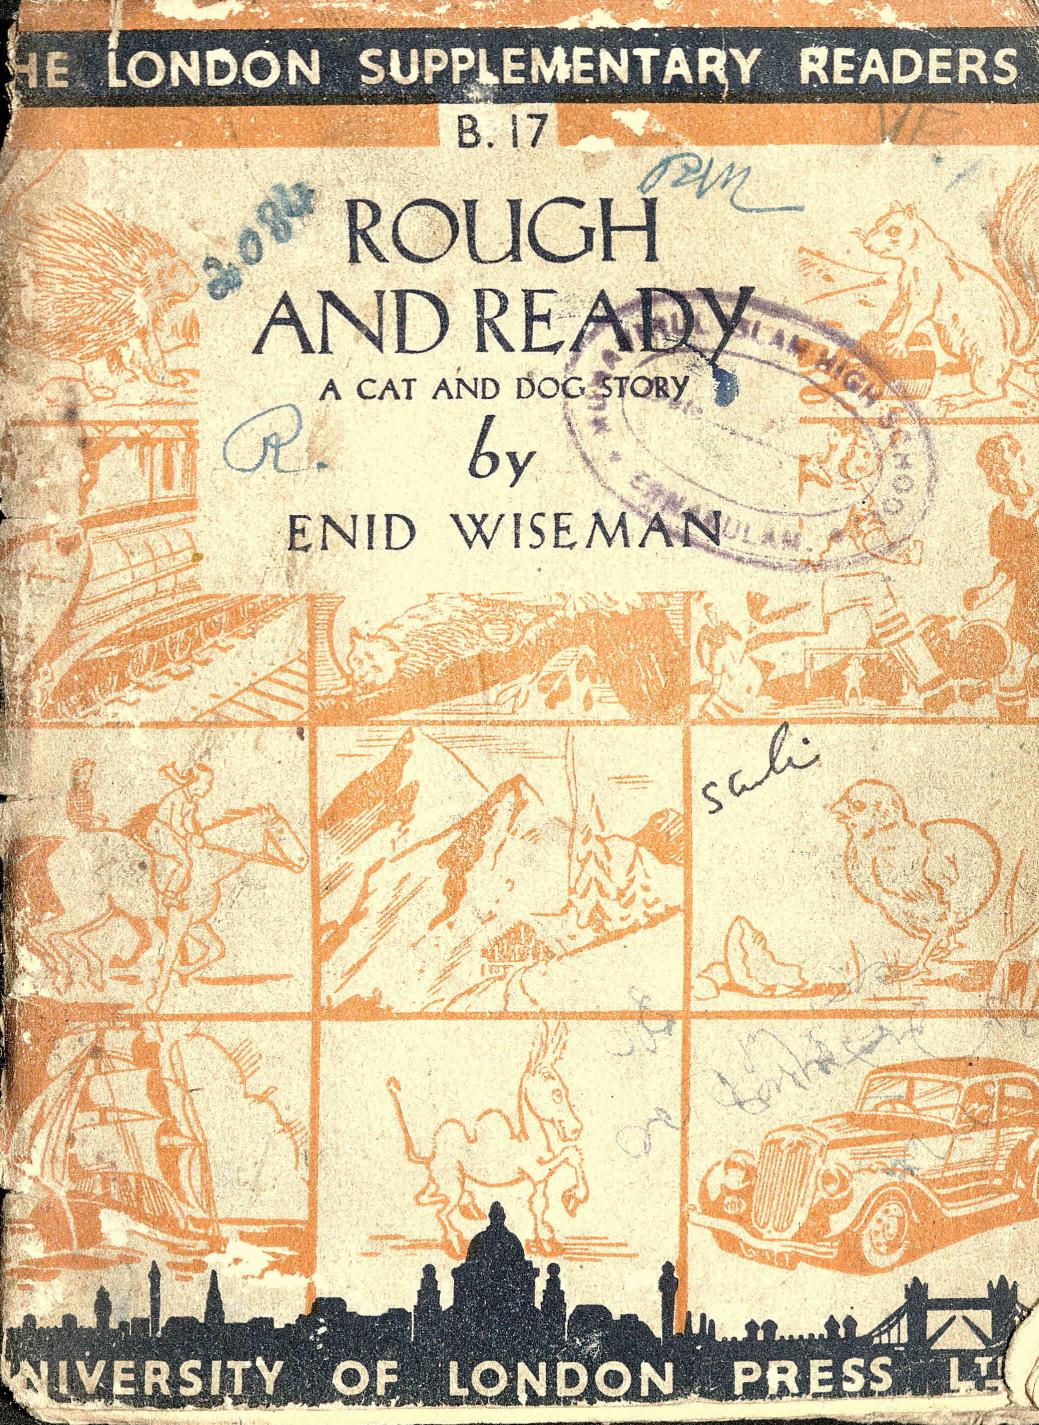  1948 - Rough and Ready - A Cat and Dog Story - Enid Wiseman